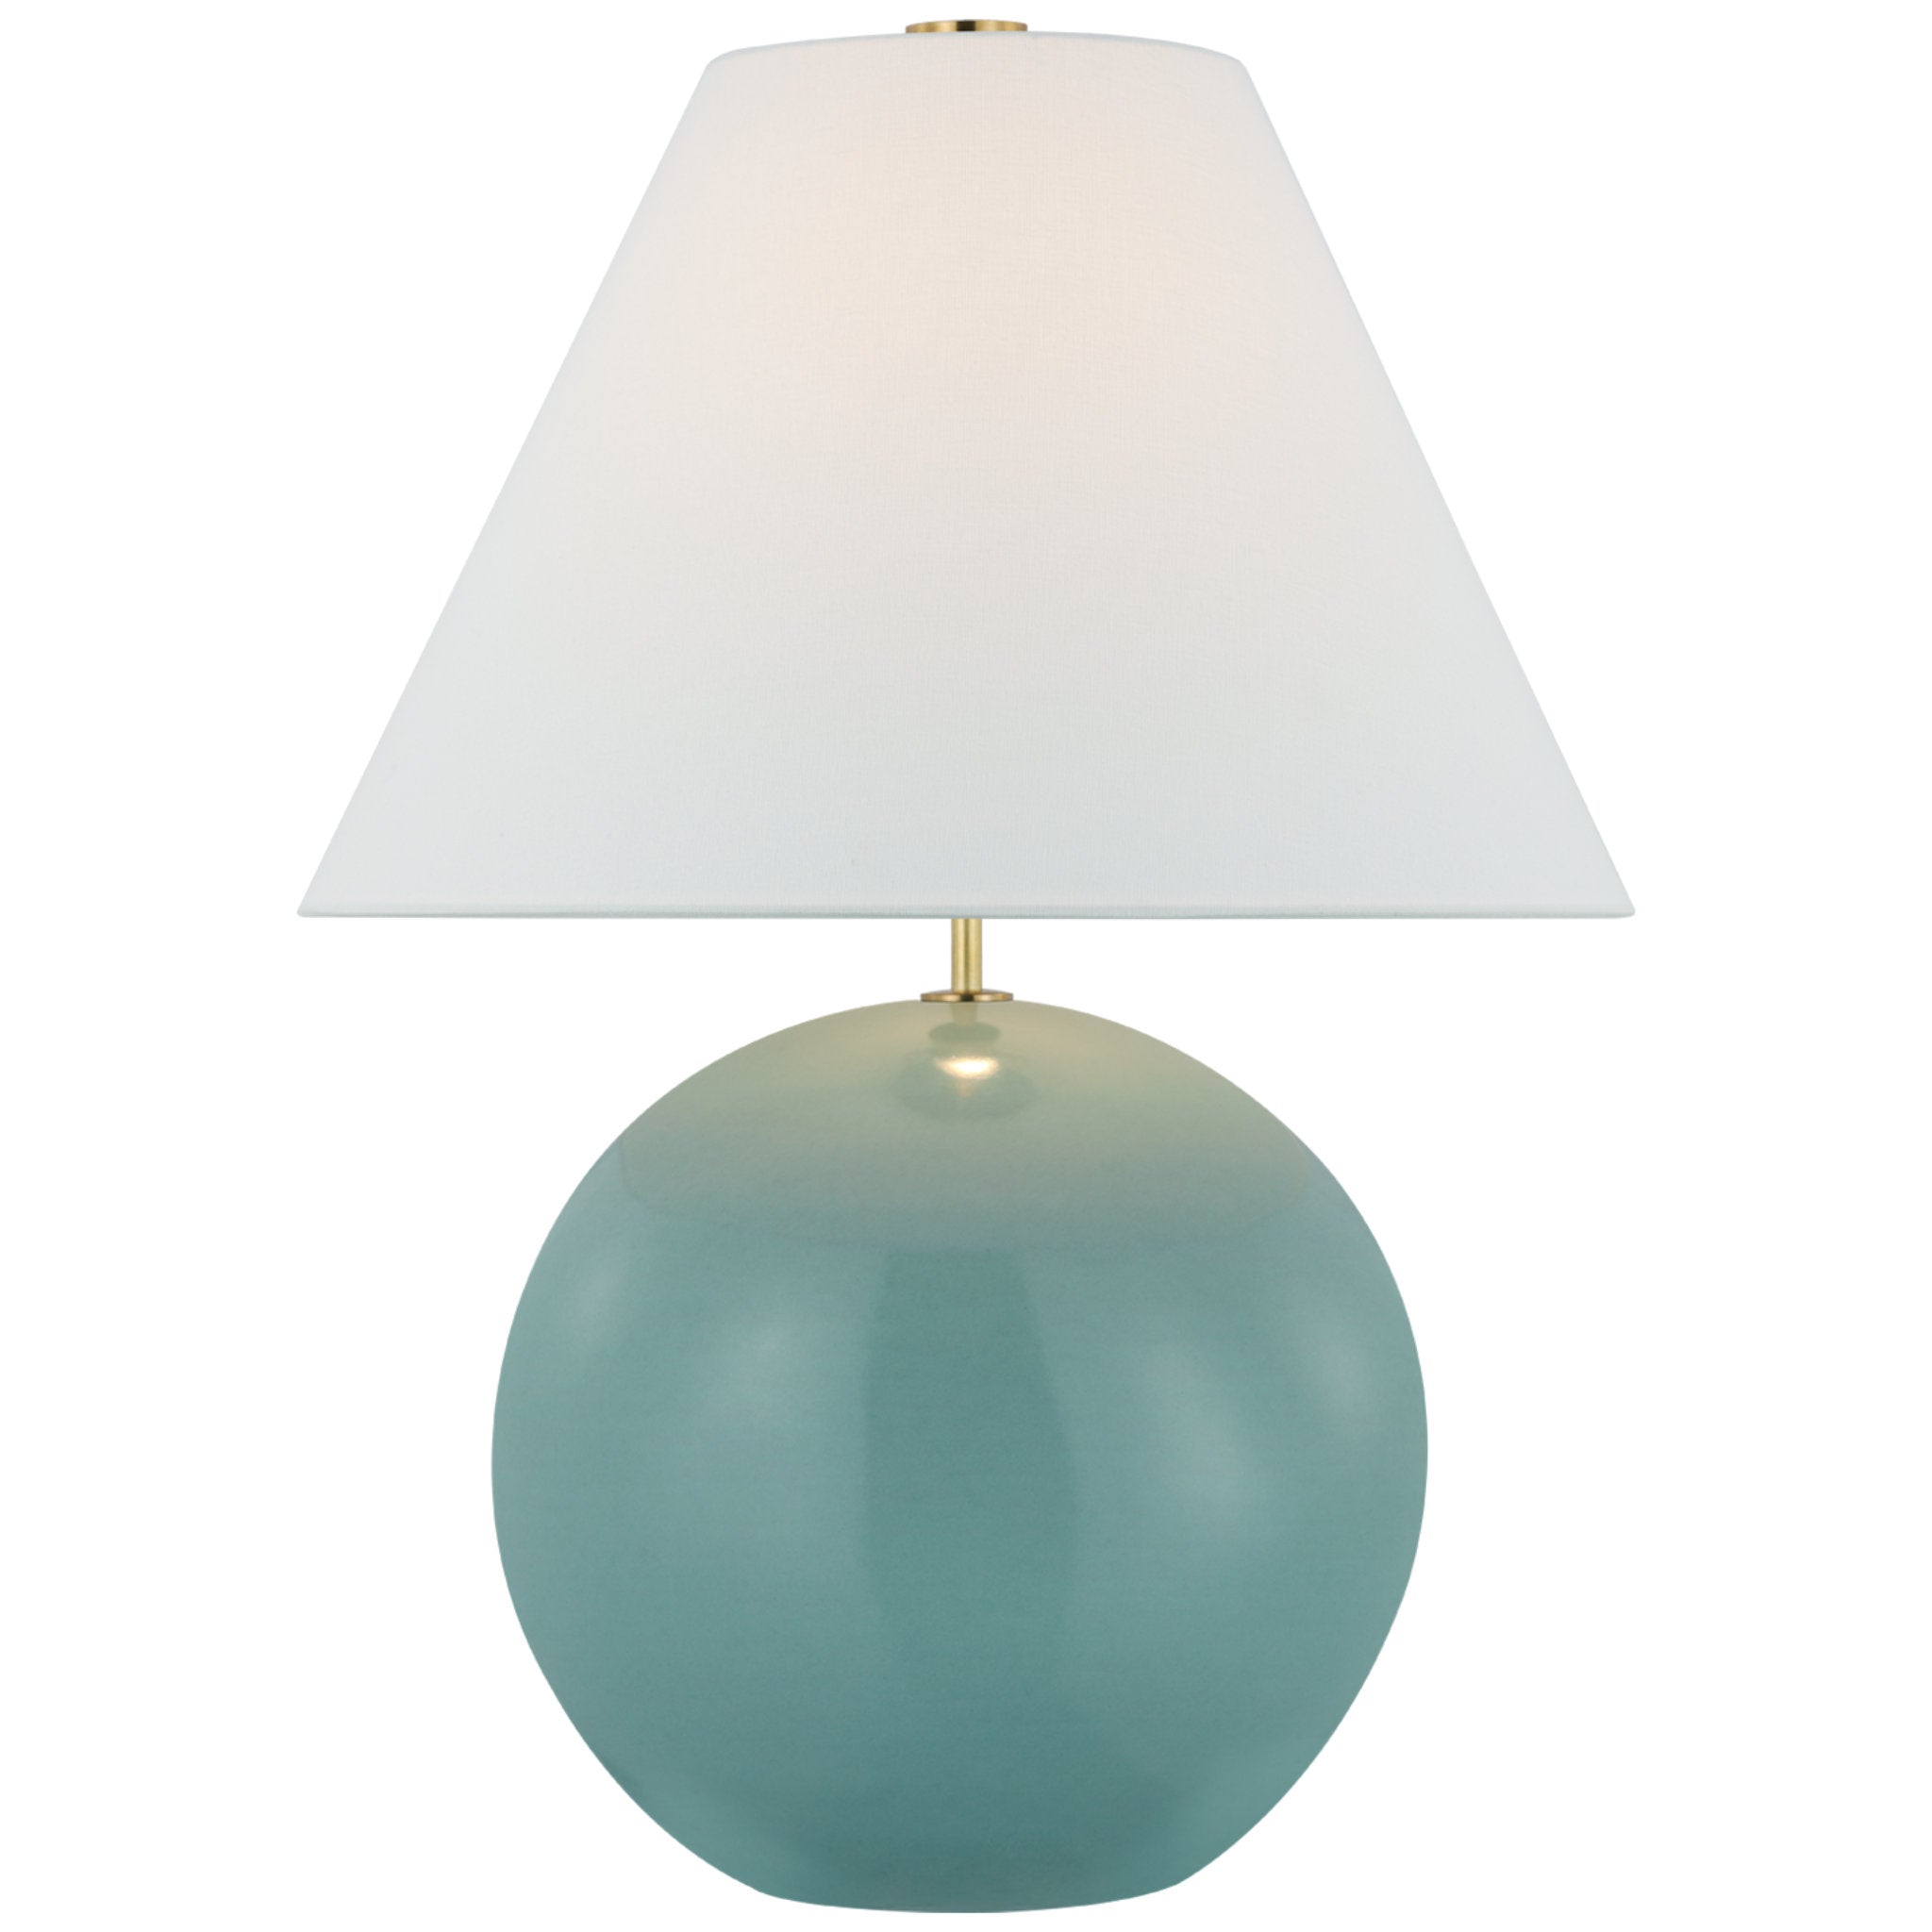 kate spade new york Brielle Large Table Lamp in Seafoam Blue with Linen Shade